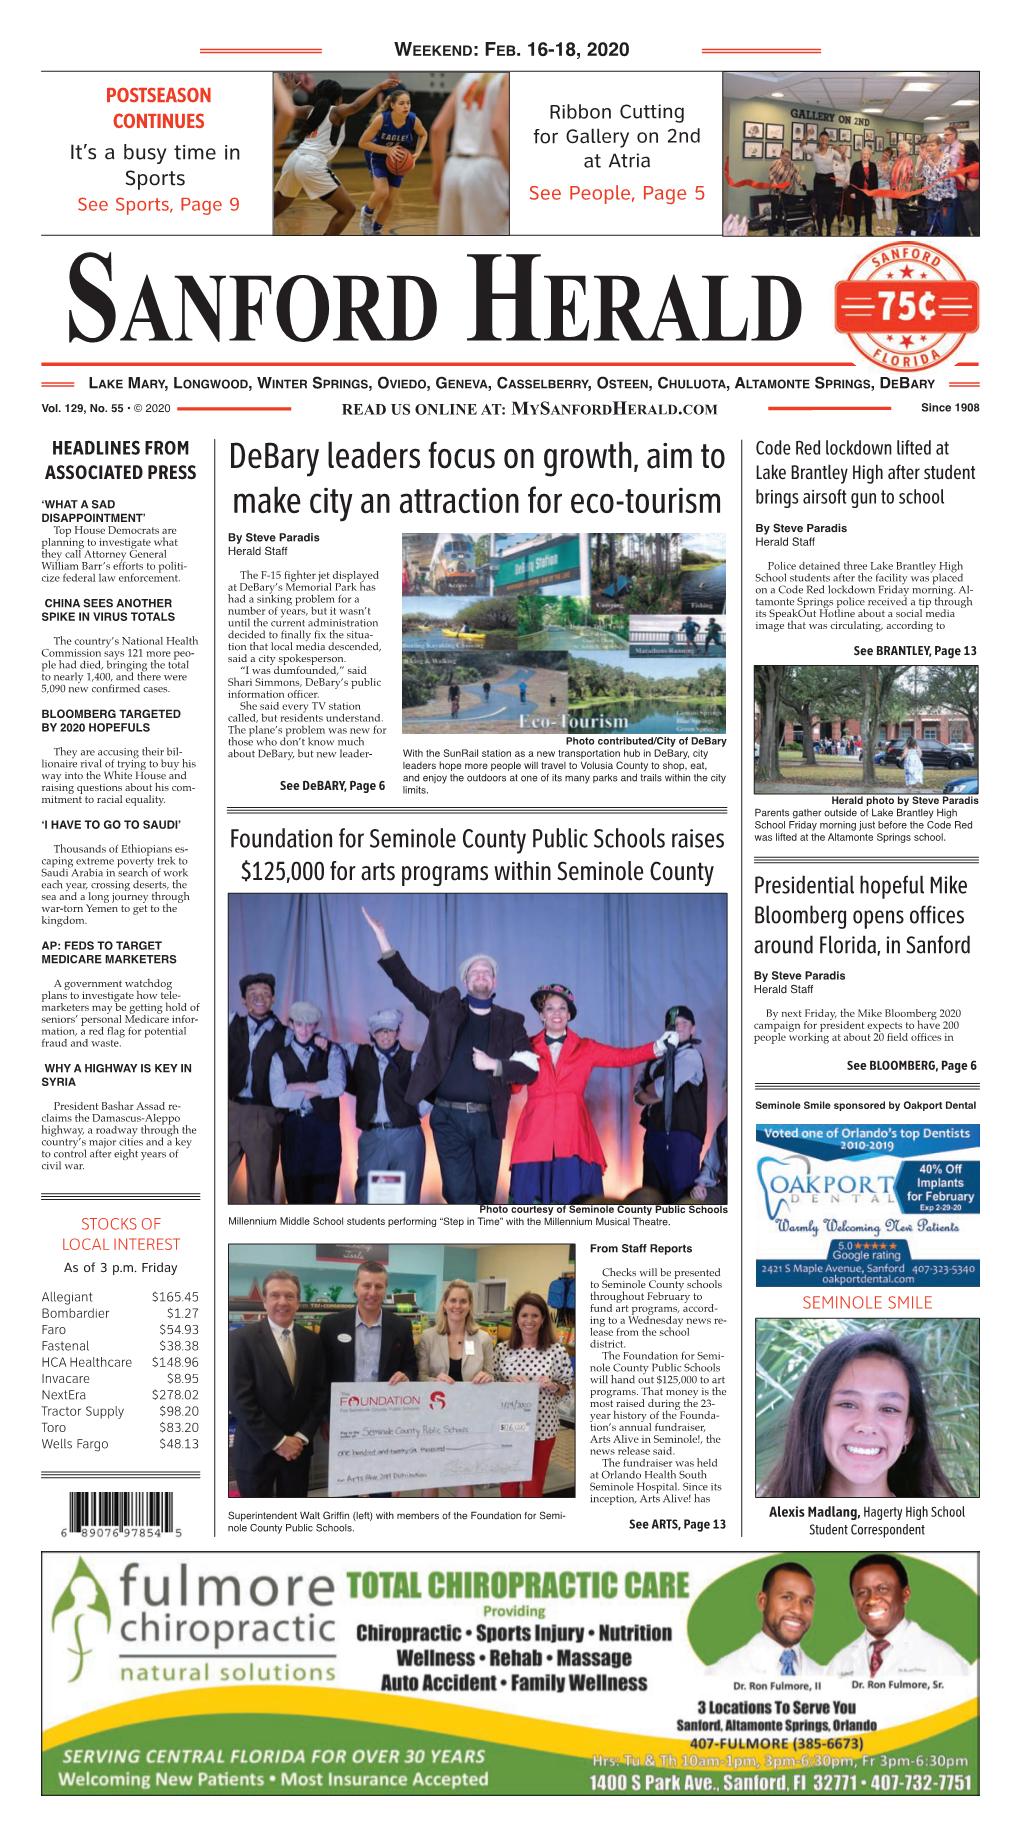 Debary Leaders Focus on Growth, Aim to Make City an Attraction for Eco